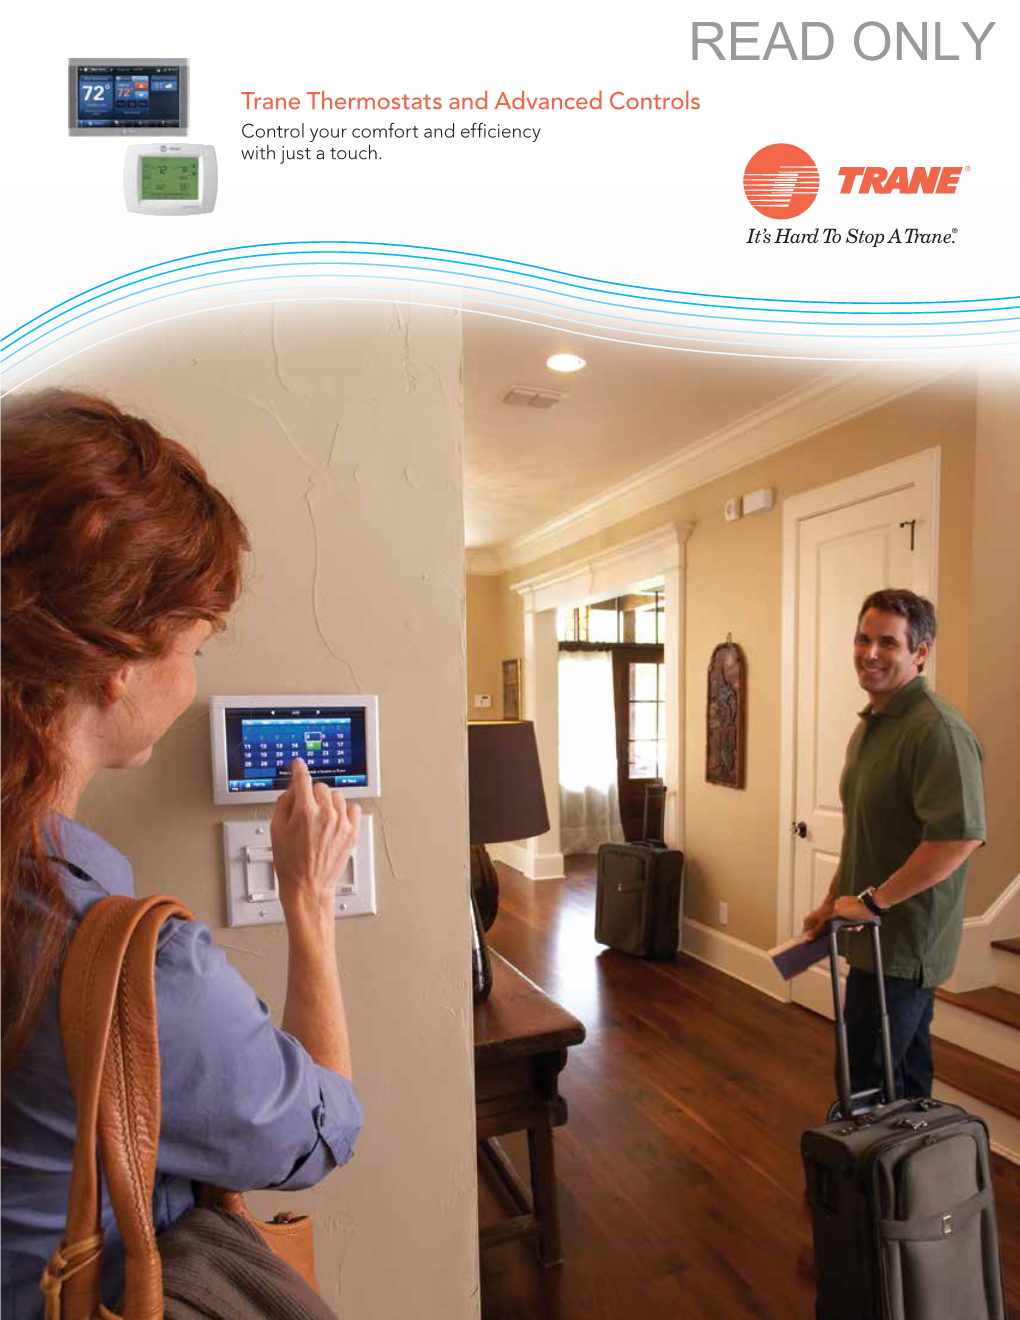 READ ONLY Trane Thermostats and Advanced Controls Control Your Comfort and Efficiency with Just a Touch